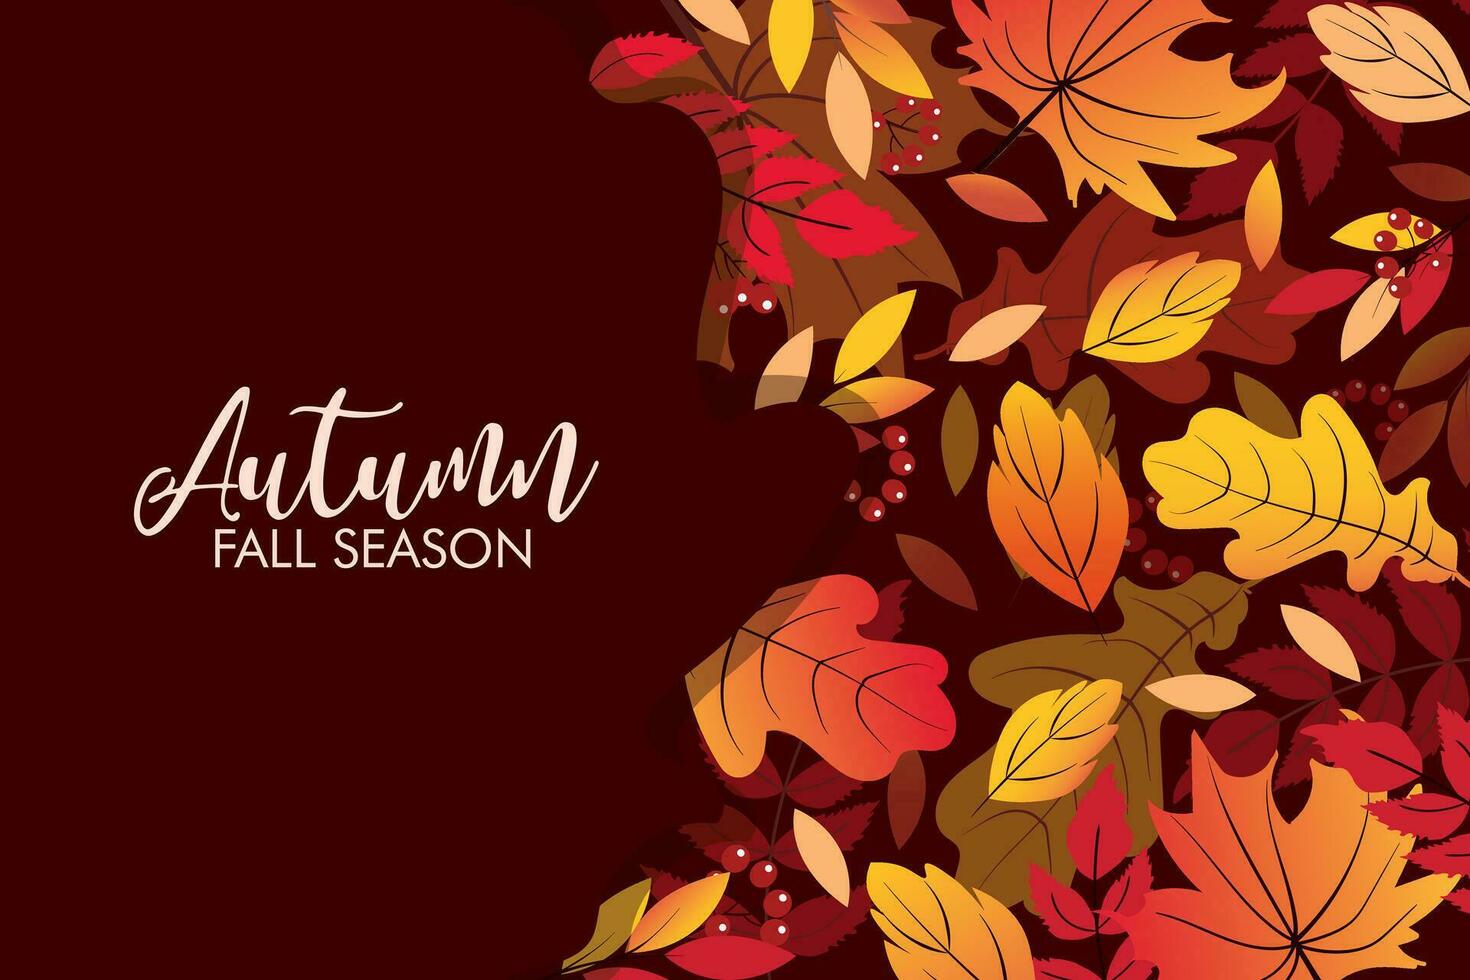 Autumn background with falling leaves vector